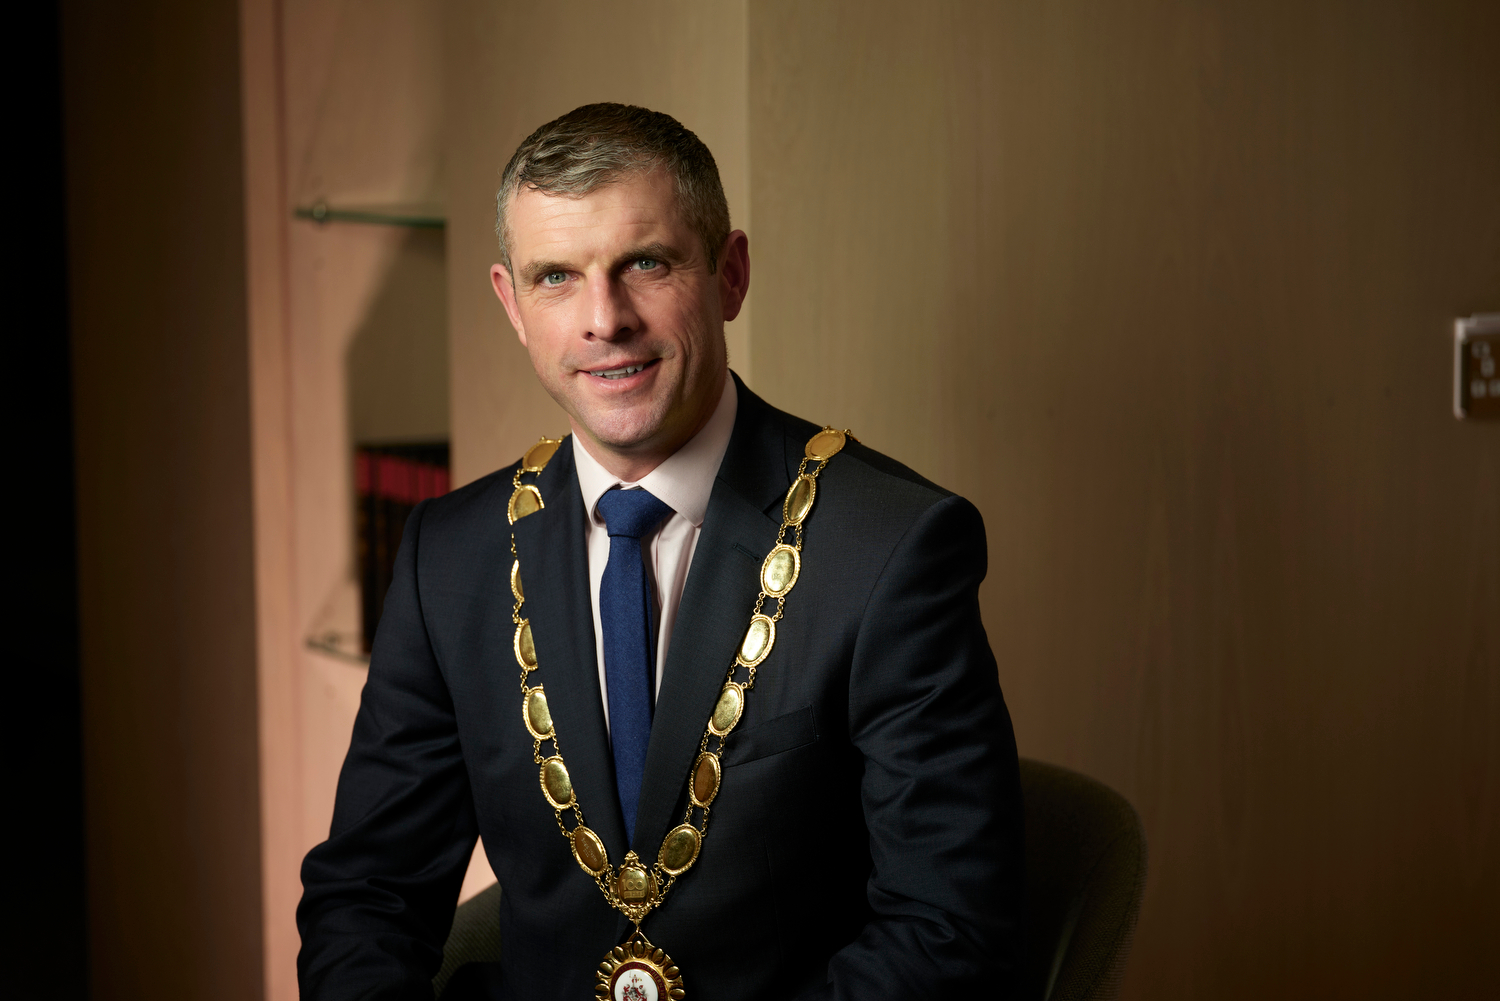 Darren Toombs takes reins of NI Law Society